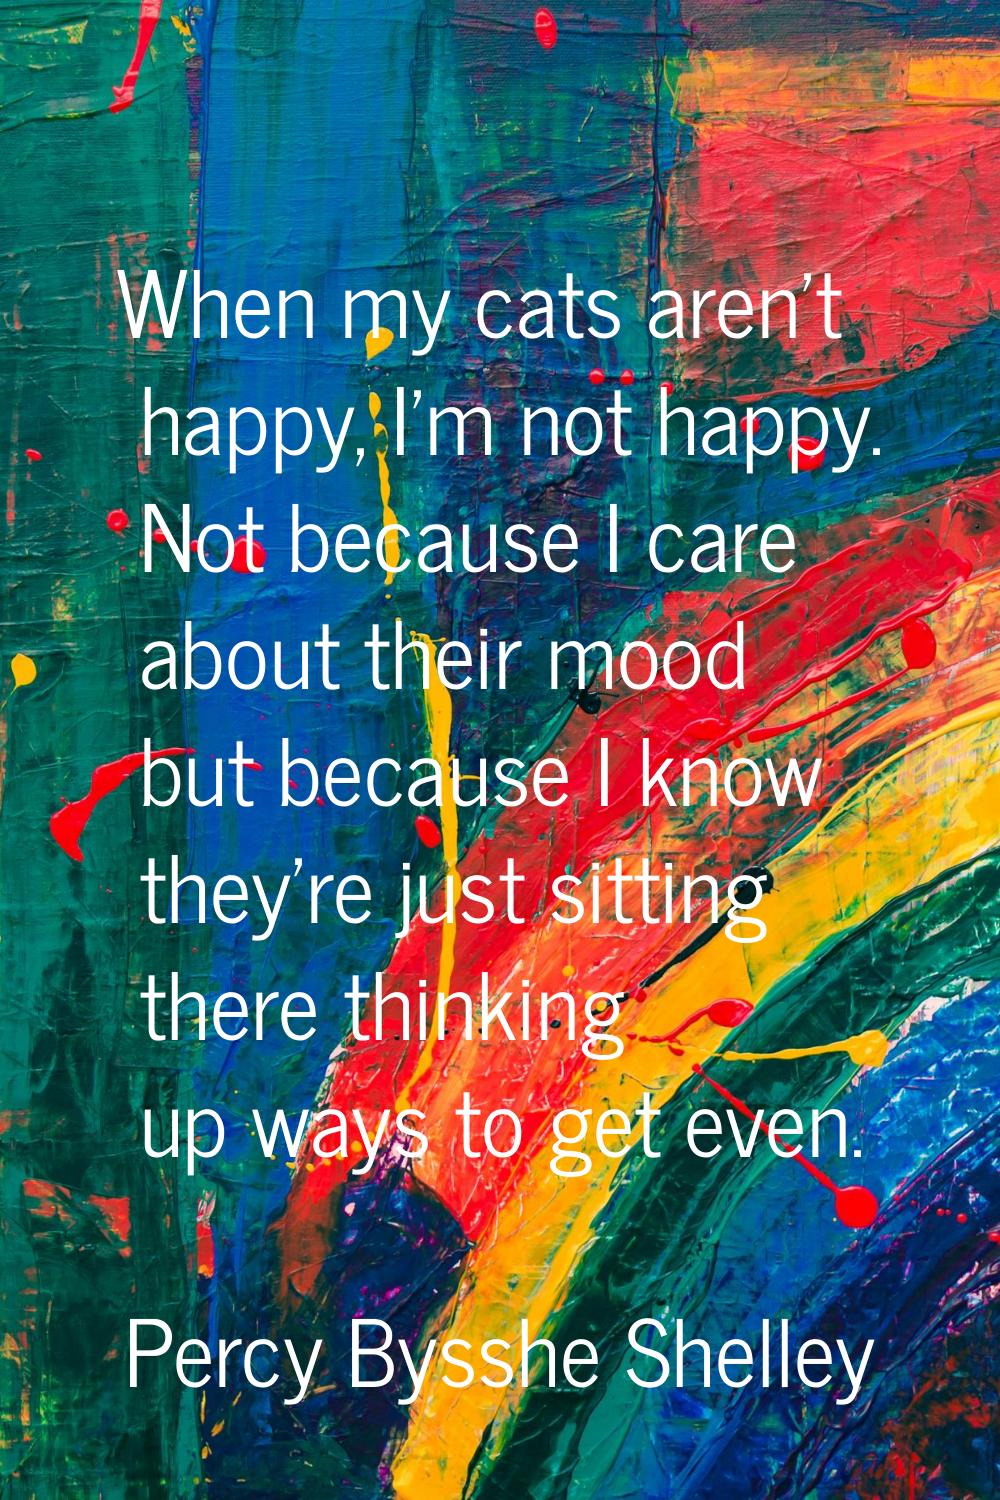 When my cats aren't happy, I'm not happy. Not because I care about their mood but because I know th